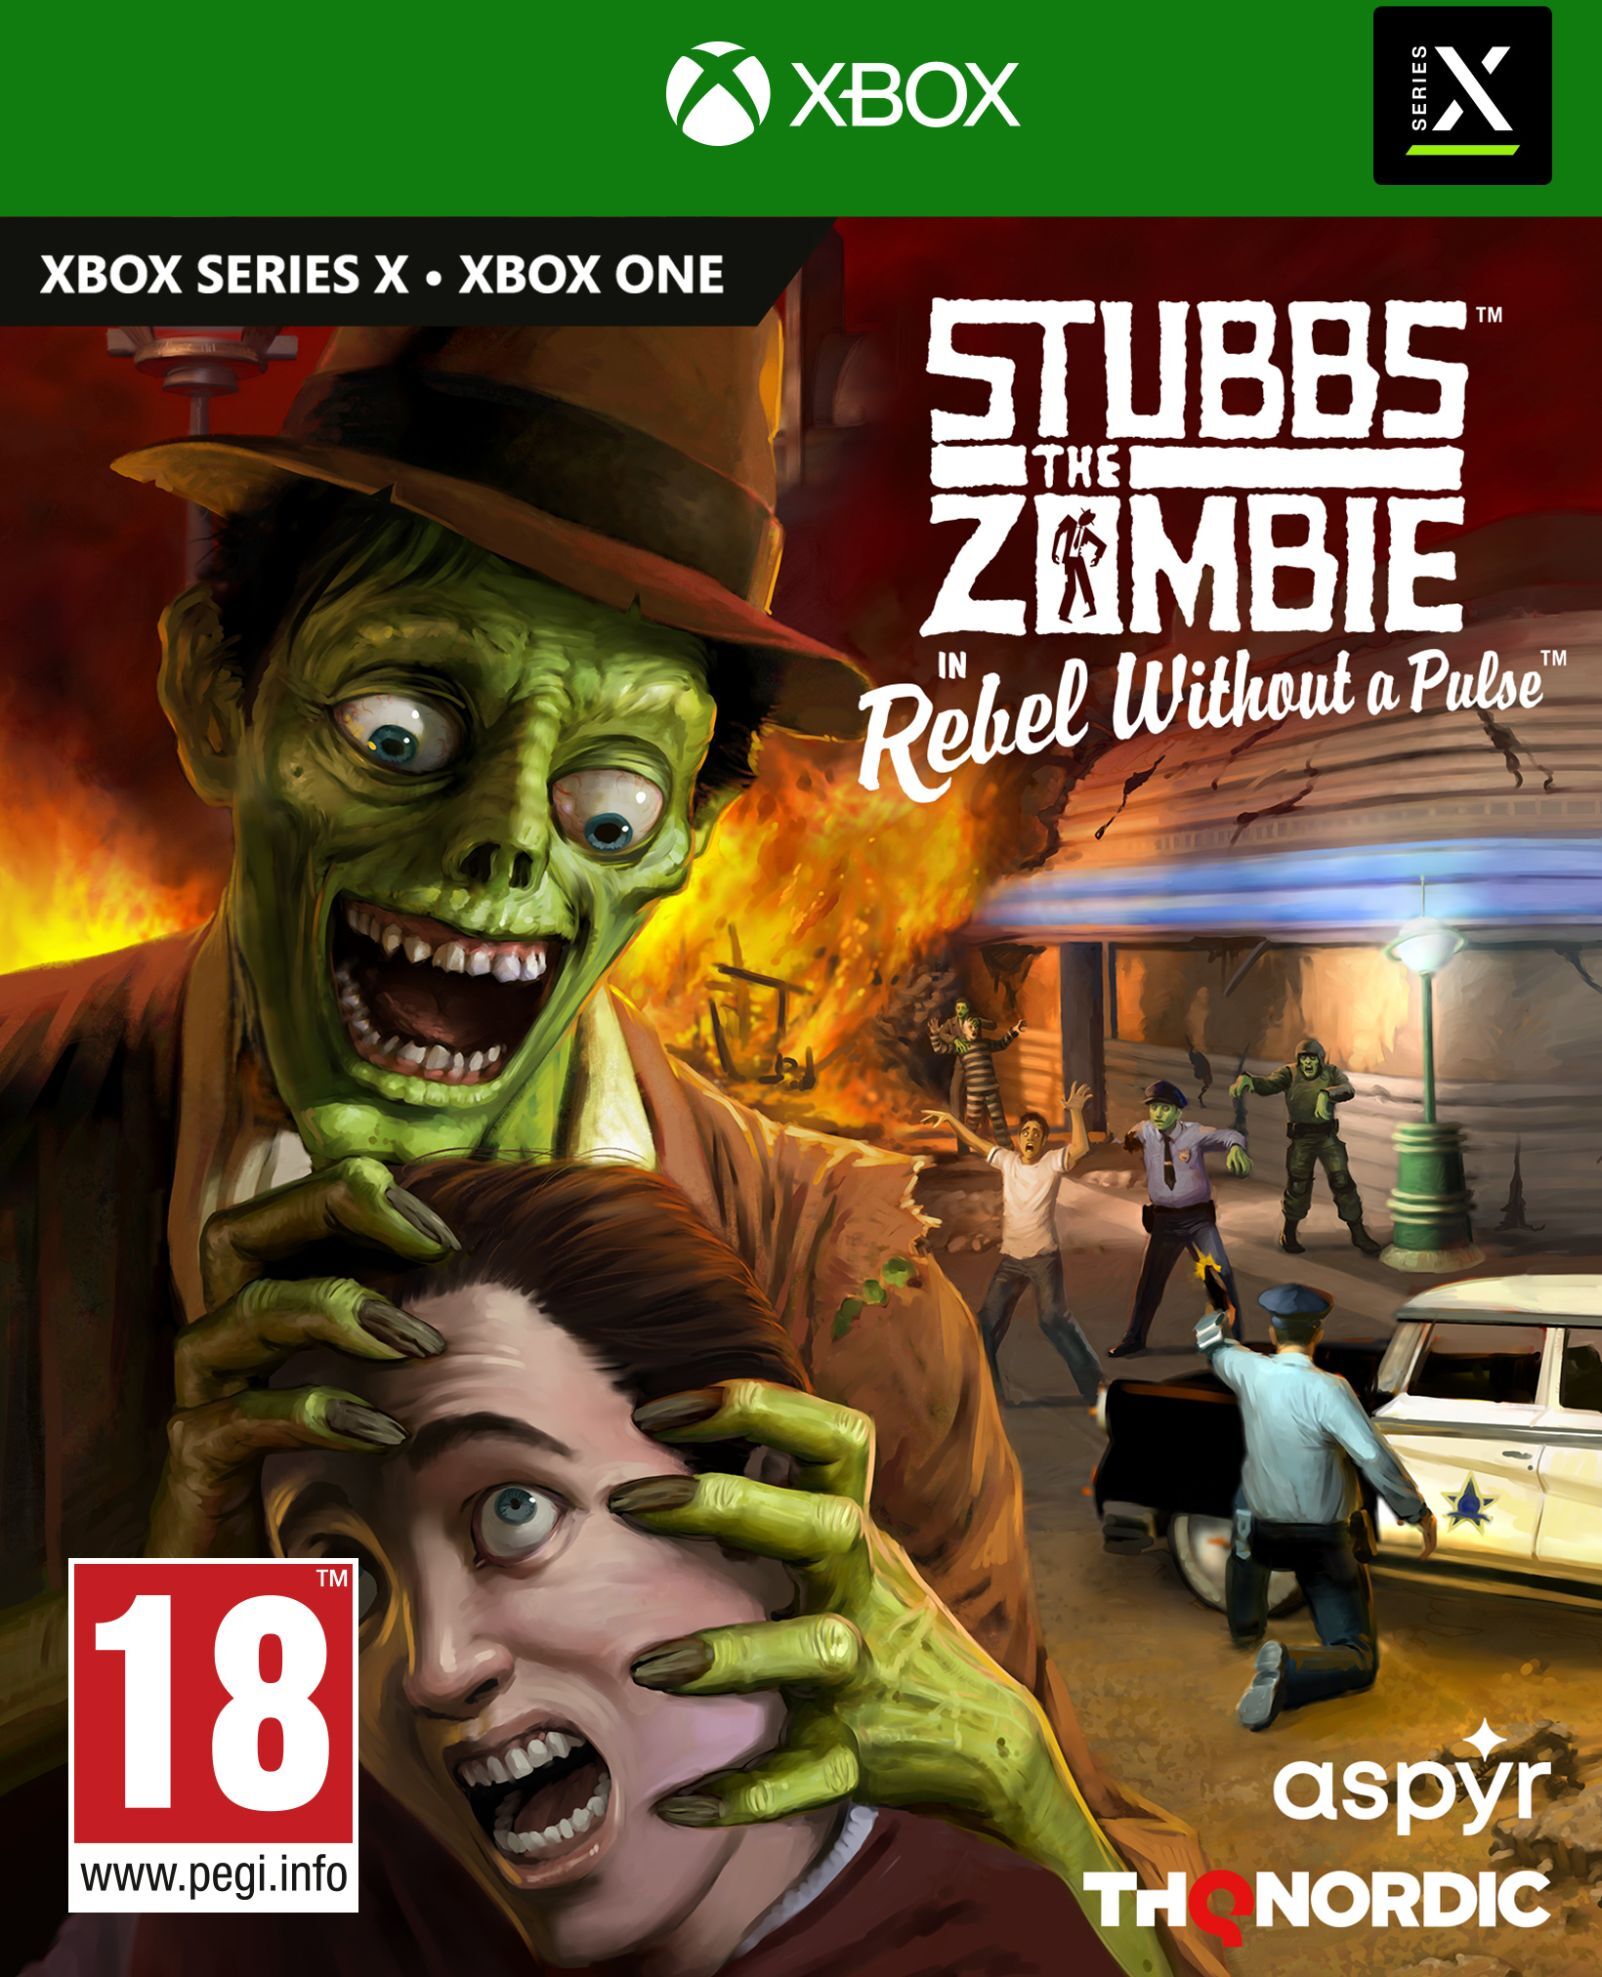 THQ Nordic - Stubbs the Zombie - Rebel Without a Pulse [XSX] (D)